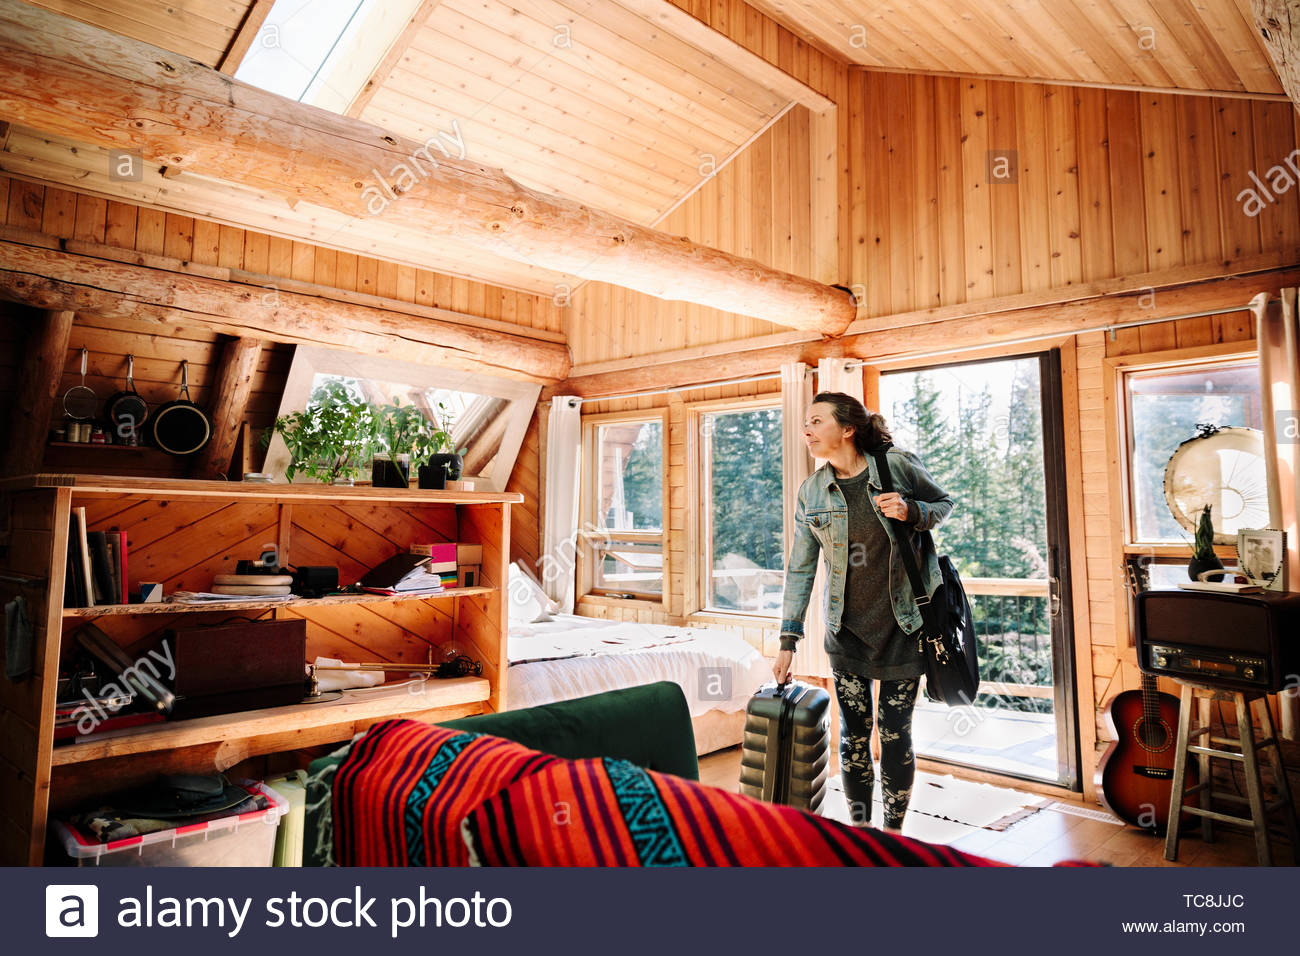 Woman with suitcase arriving at cabin Stock Photo